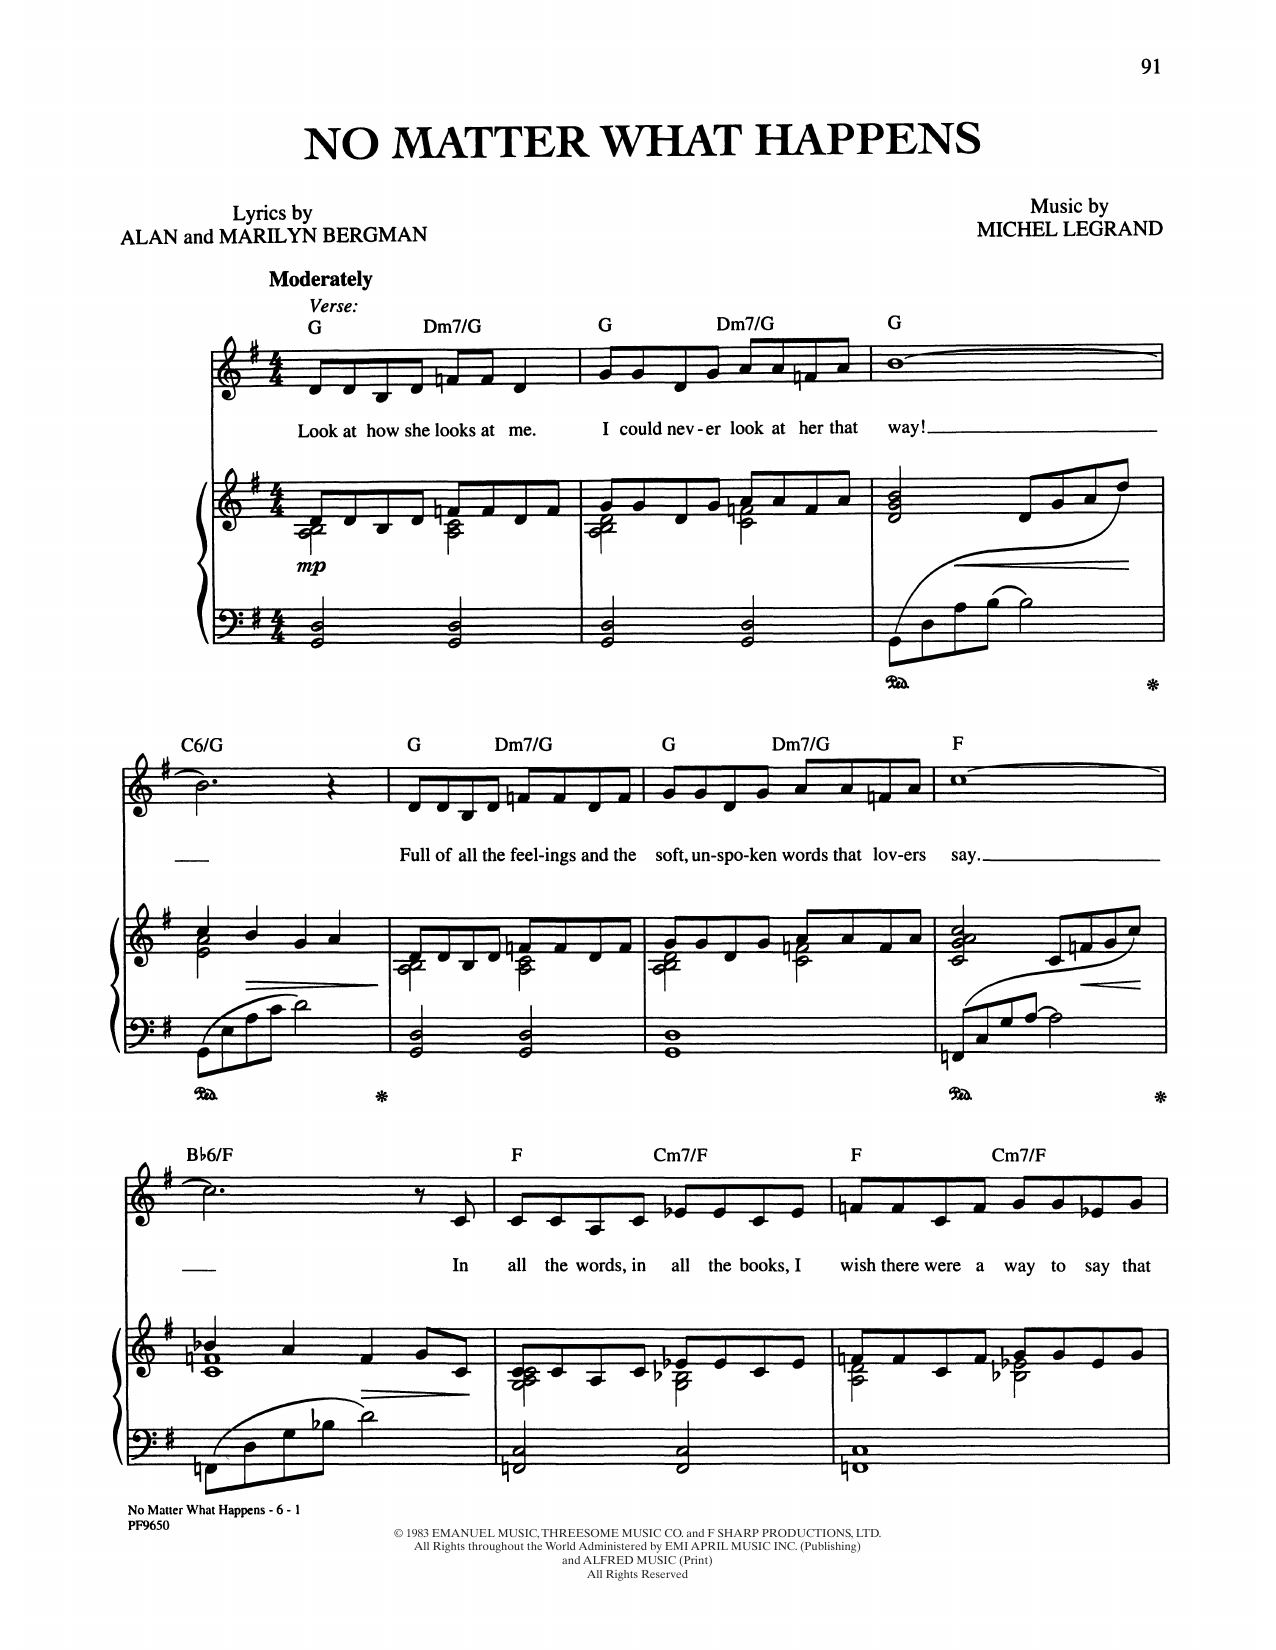 Download Alan and Marilyn Bergman and Michel No Matter What Happens Sheet Music